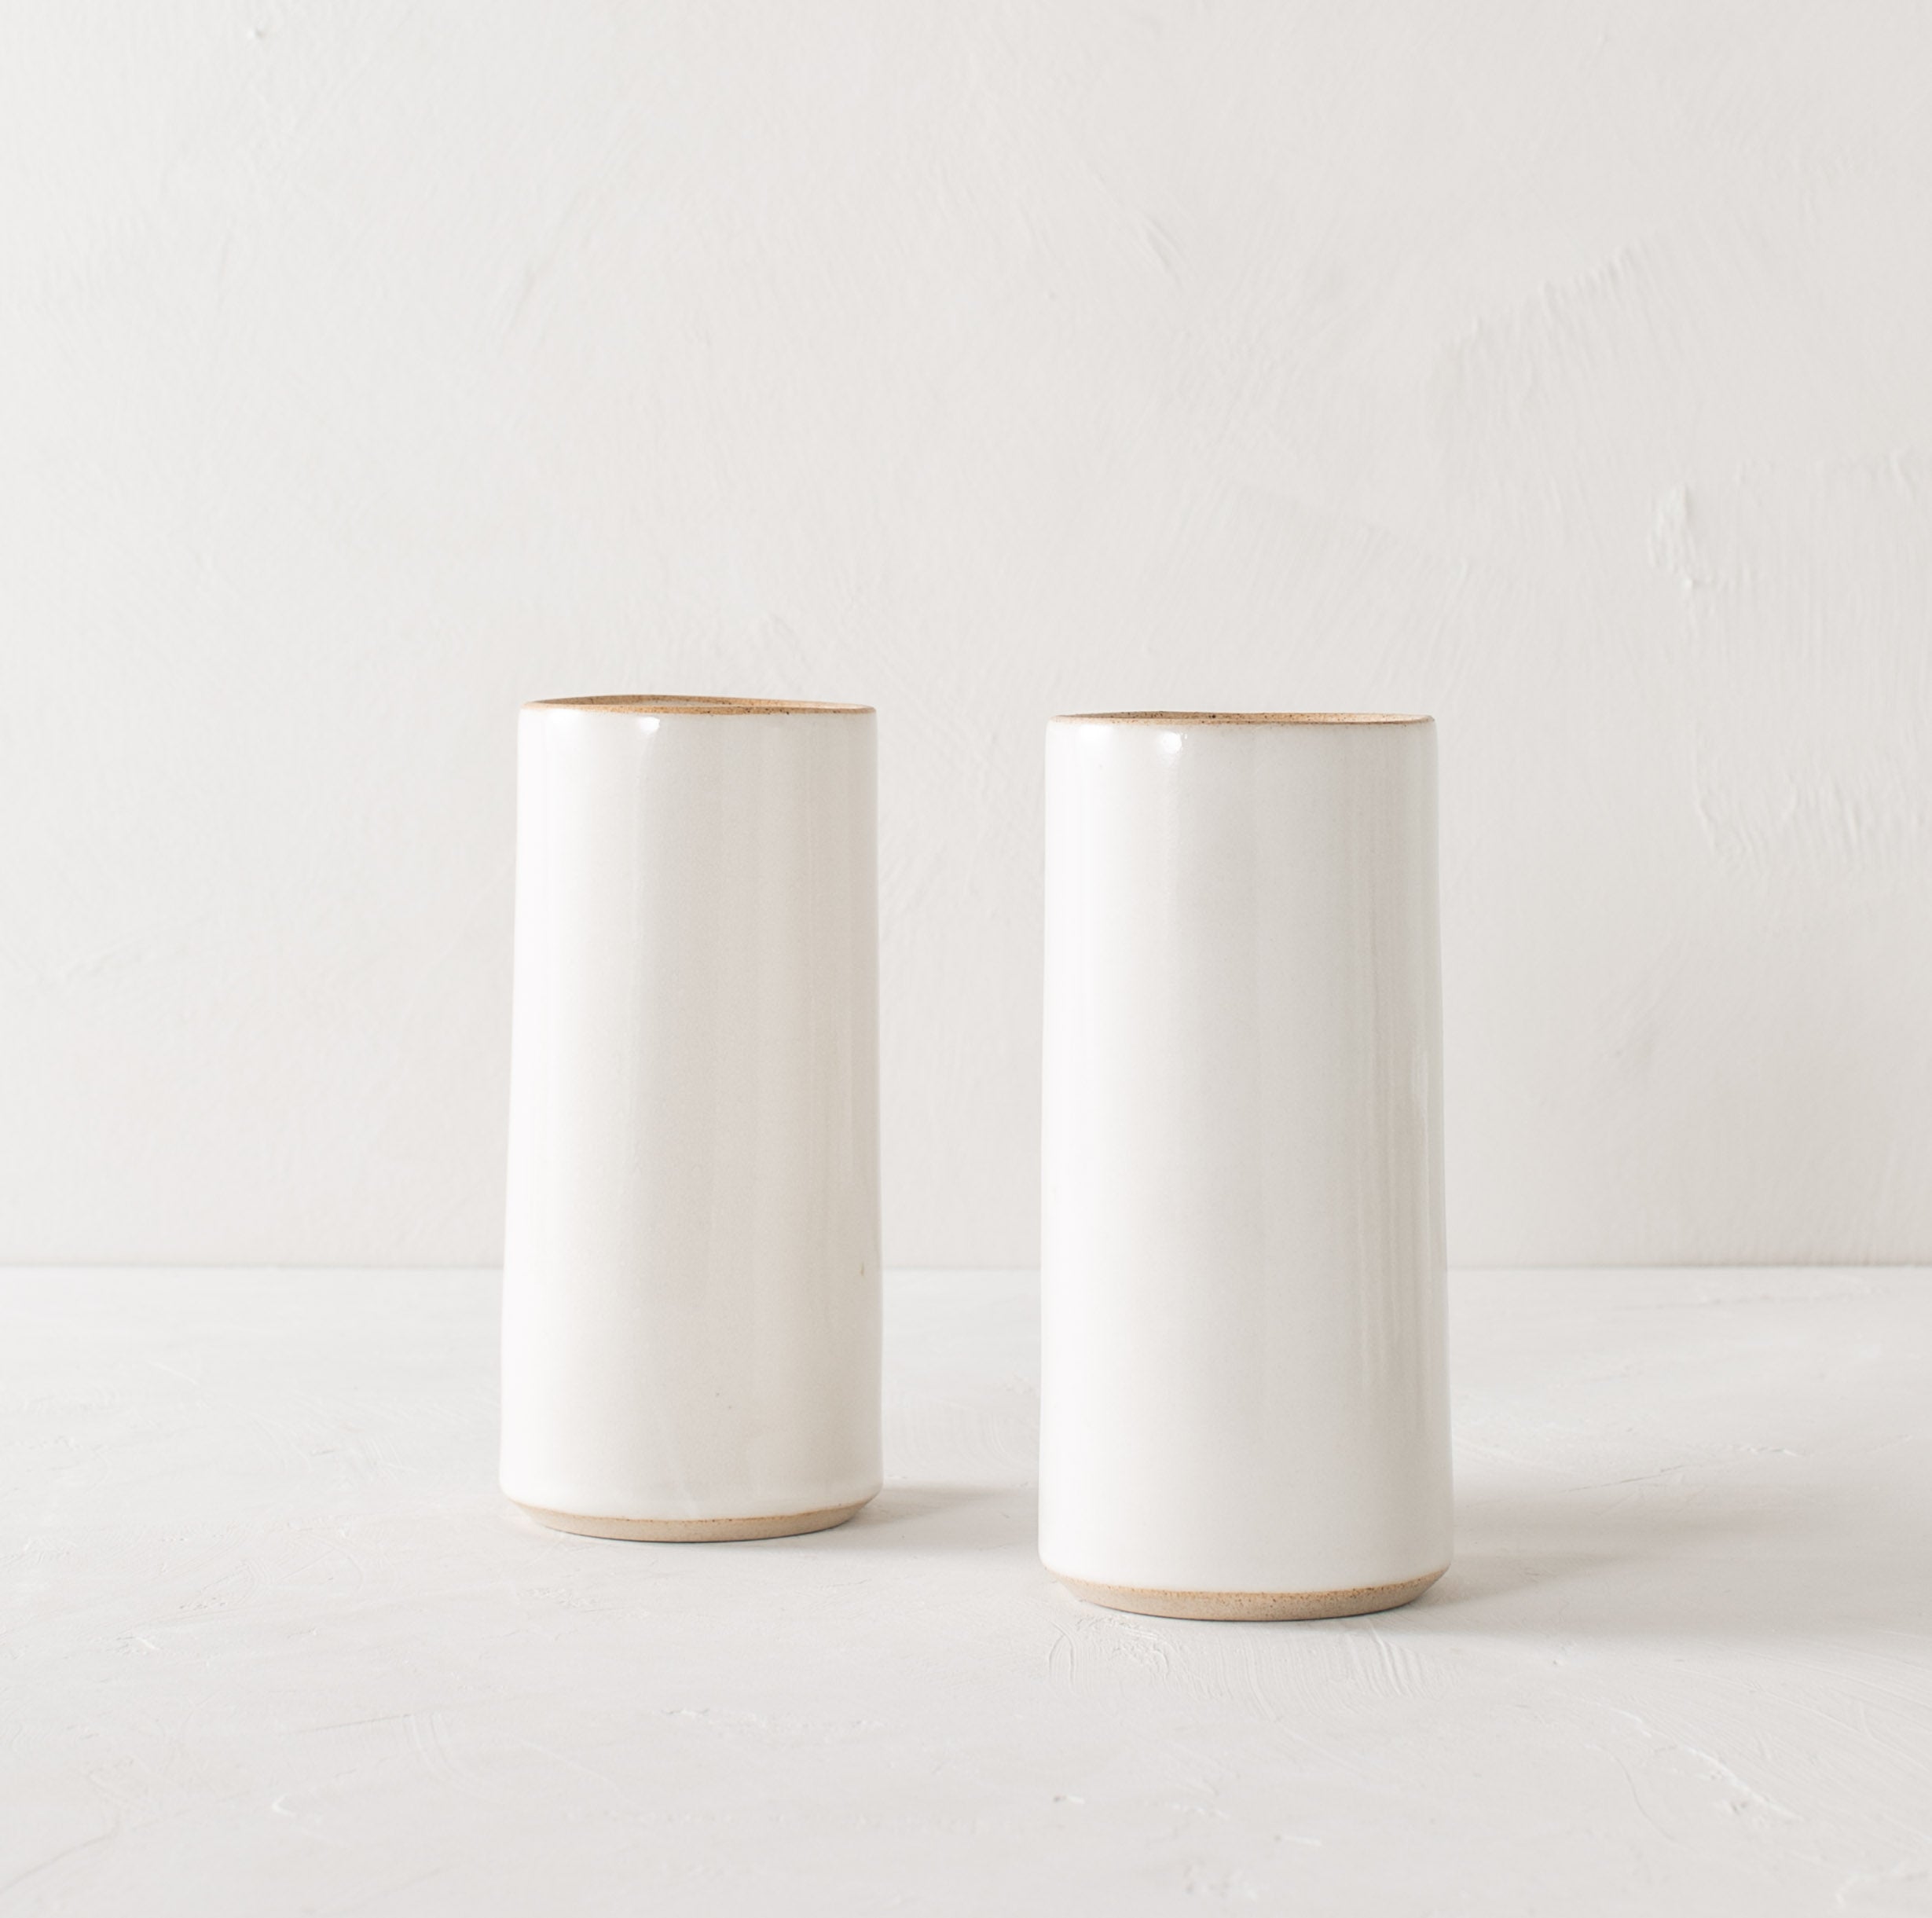 Two tall white glazed ceramic cylinder vases with an exposed stoneware rim and base. Staged on a white textured plaster table and a white plaster textured wall. Designed and sold by Convivial Production, Kansas City Ceramics.